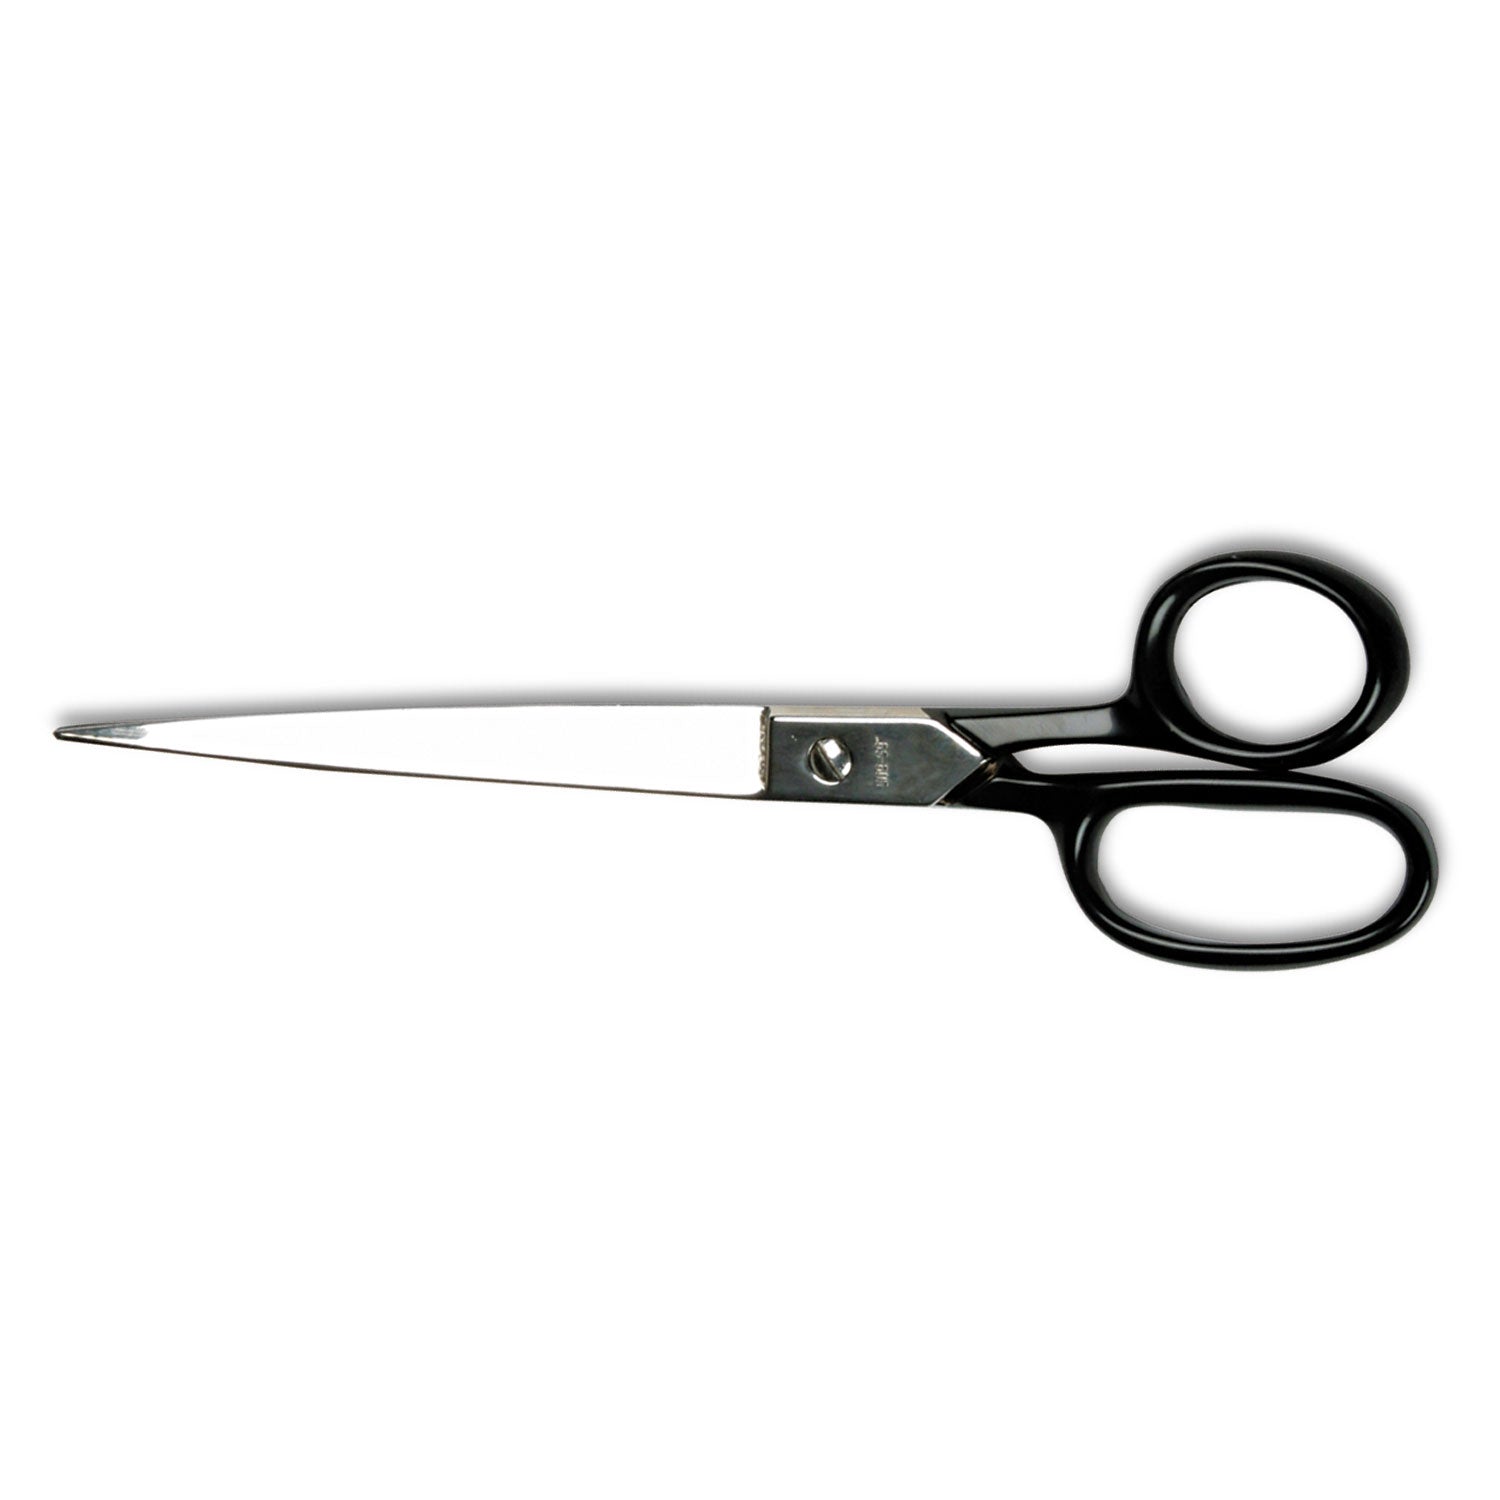 Hot Forged Carbon Steel Shears, 9" Long, 4.5" Cut Length, Black Straight Handle - 